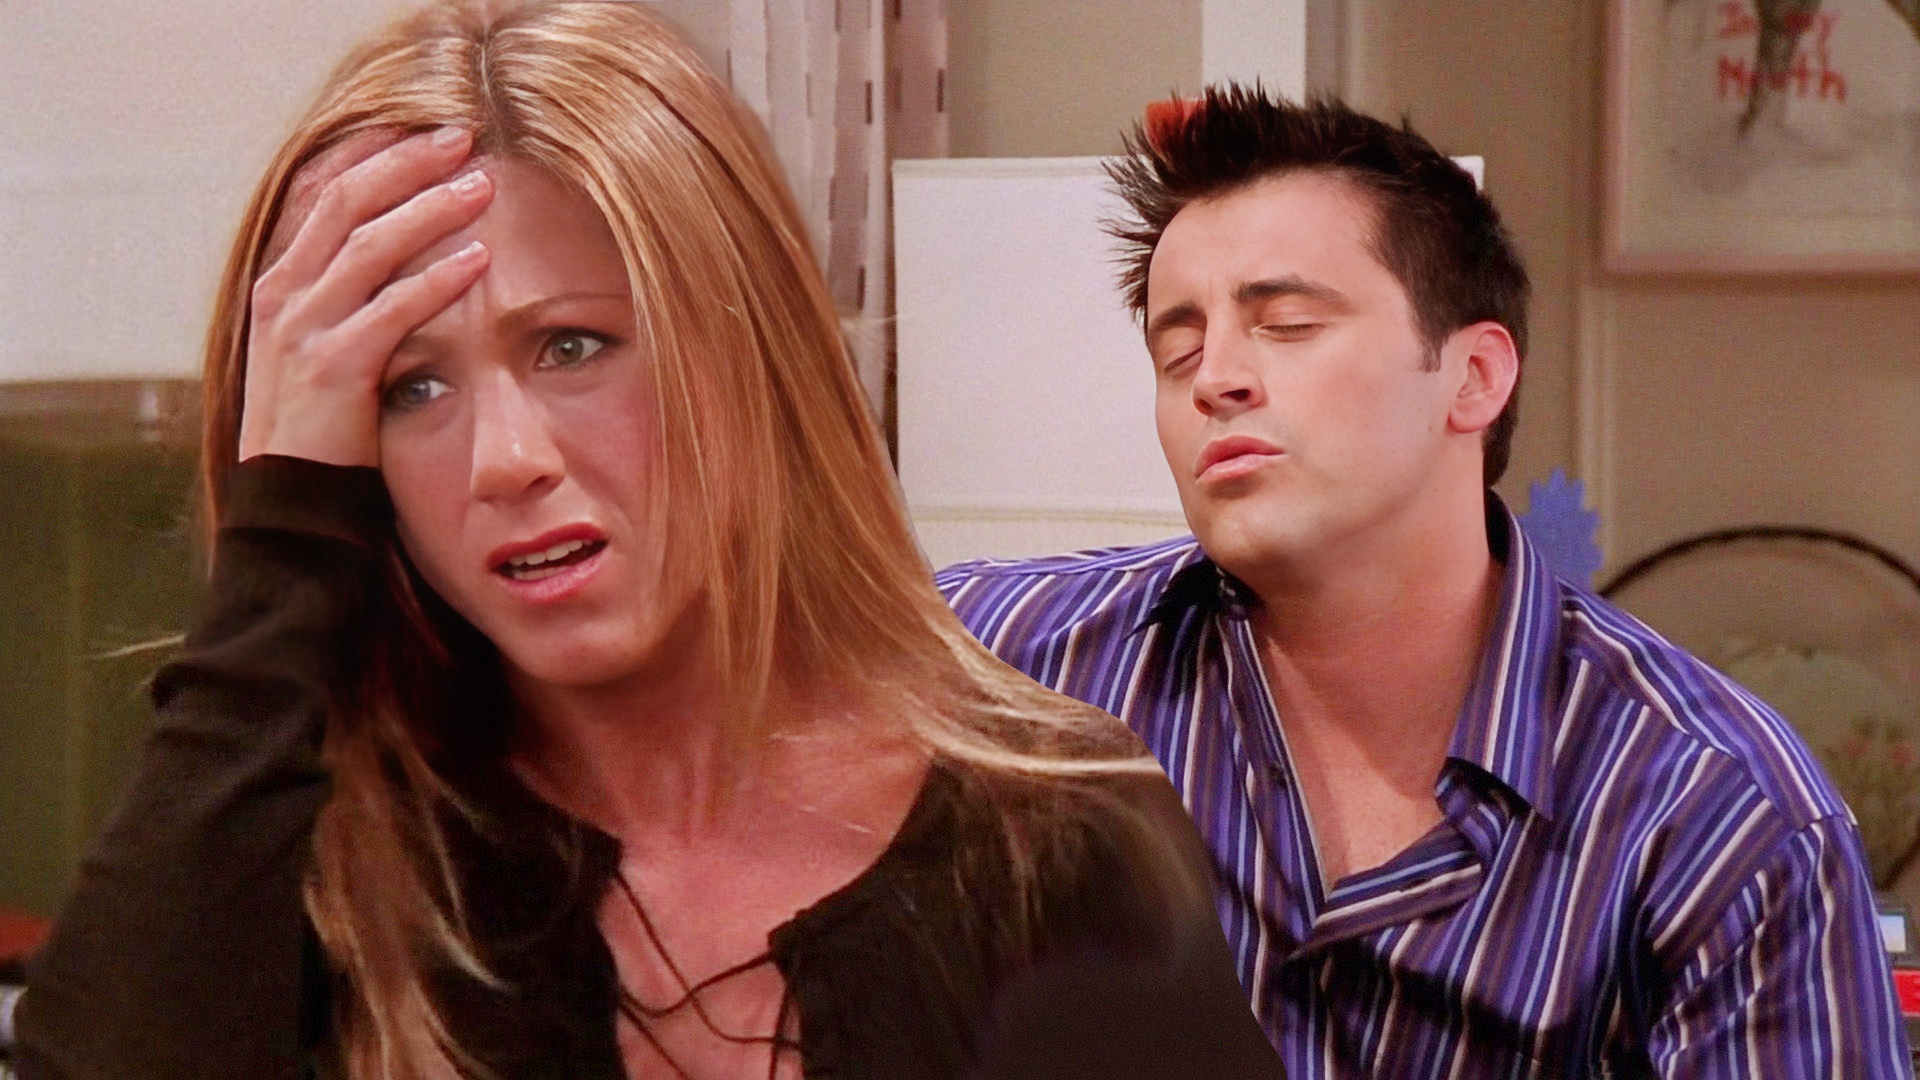 The Depressing Truth about Friends That'll Ruin the Show for You